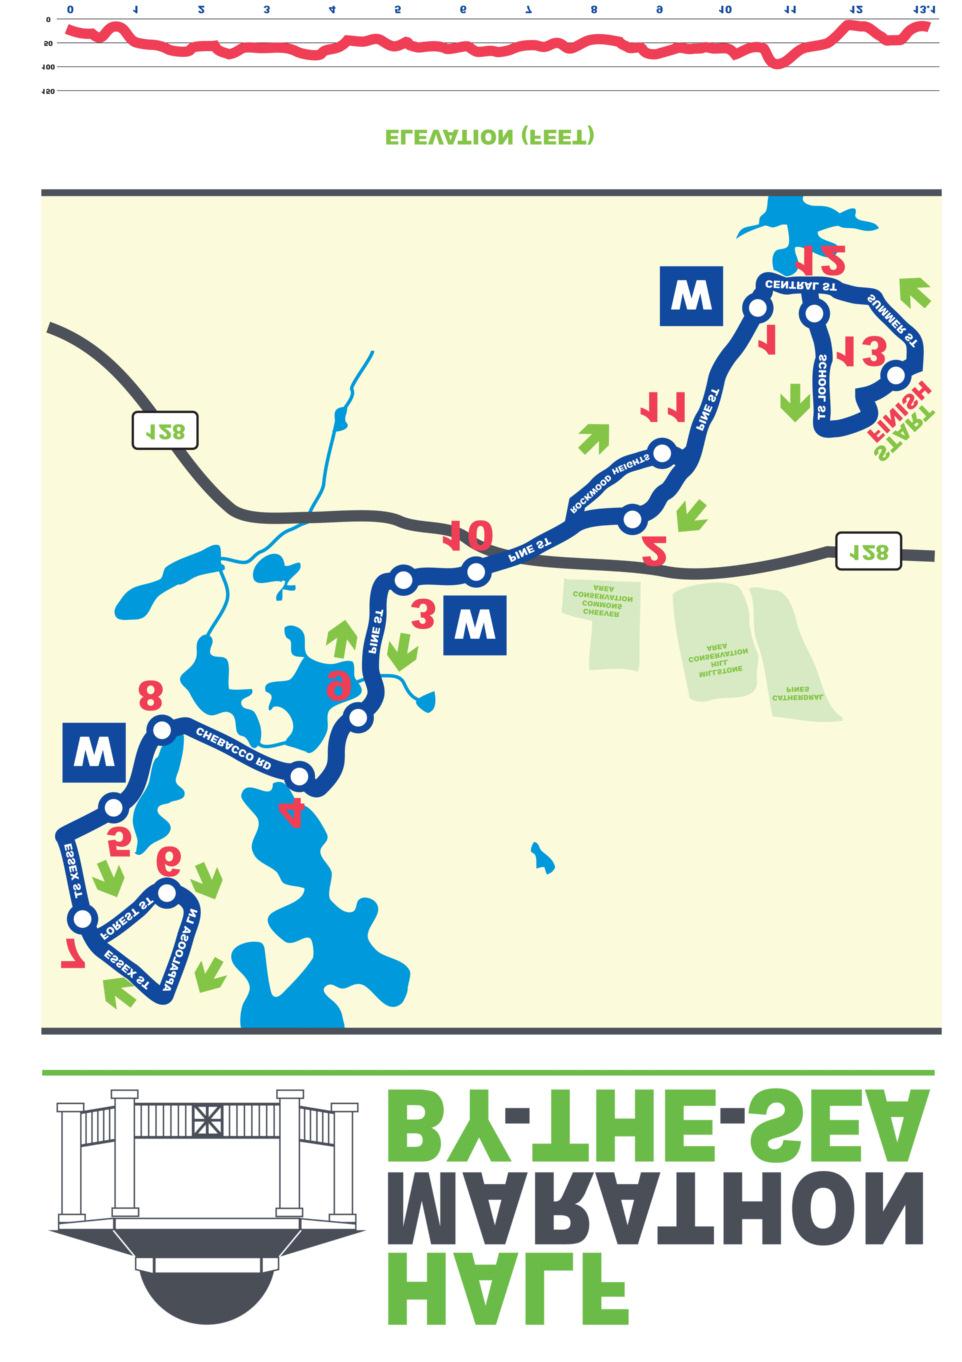 USATF Certified Half Marathon Course 13.1 Miles Courses will be clearly marked with arrow signs and mile markers RACE Please be sure to stay on the right side of the road.